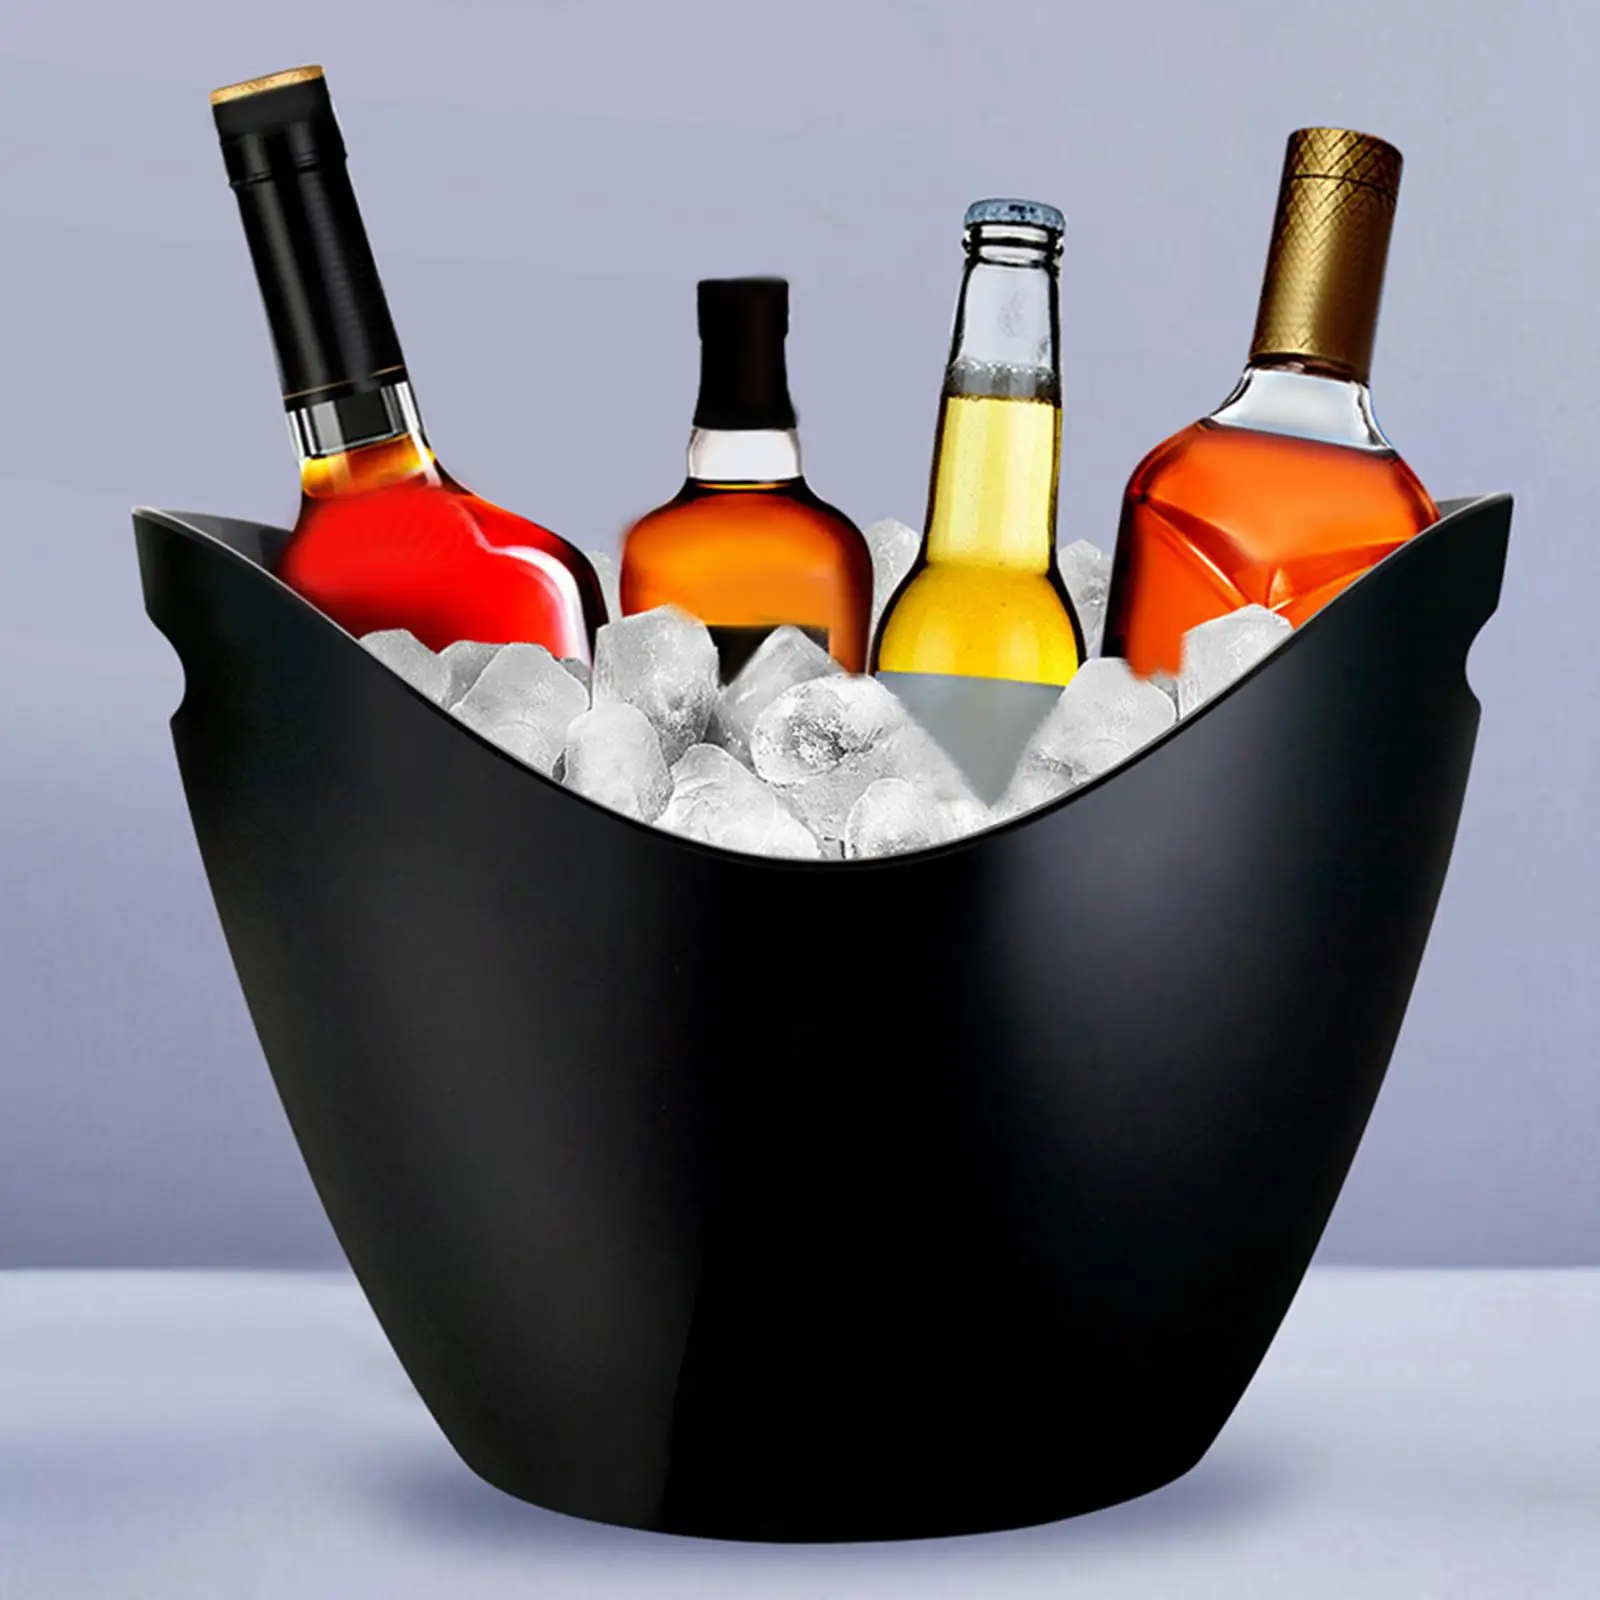 Ice Bucket Wine Bucket, 8 Liter Plastic Tub for Drinks and Parties, Perfect for Wine, Champagne or Beer Bottles